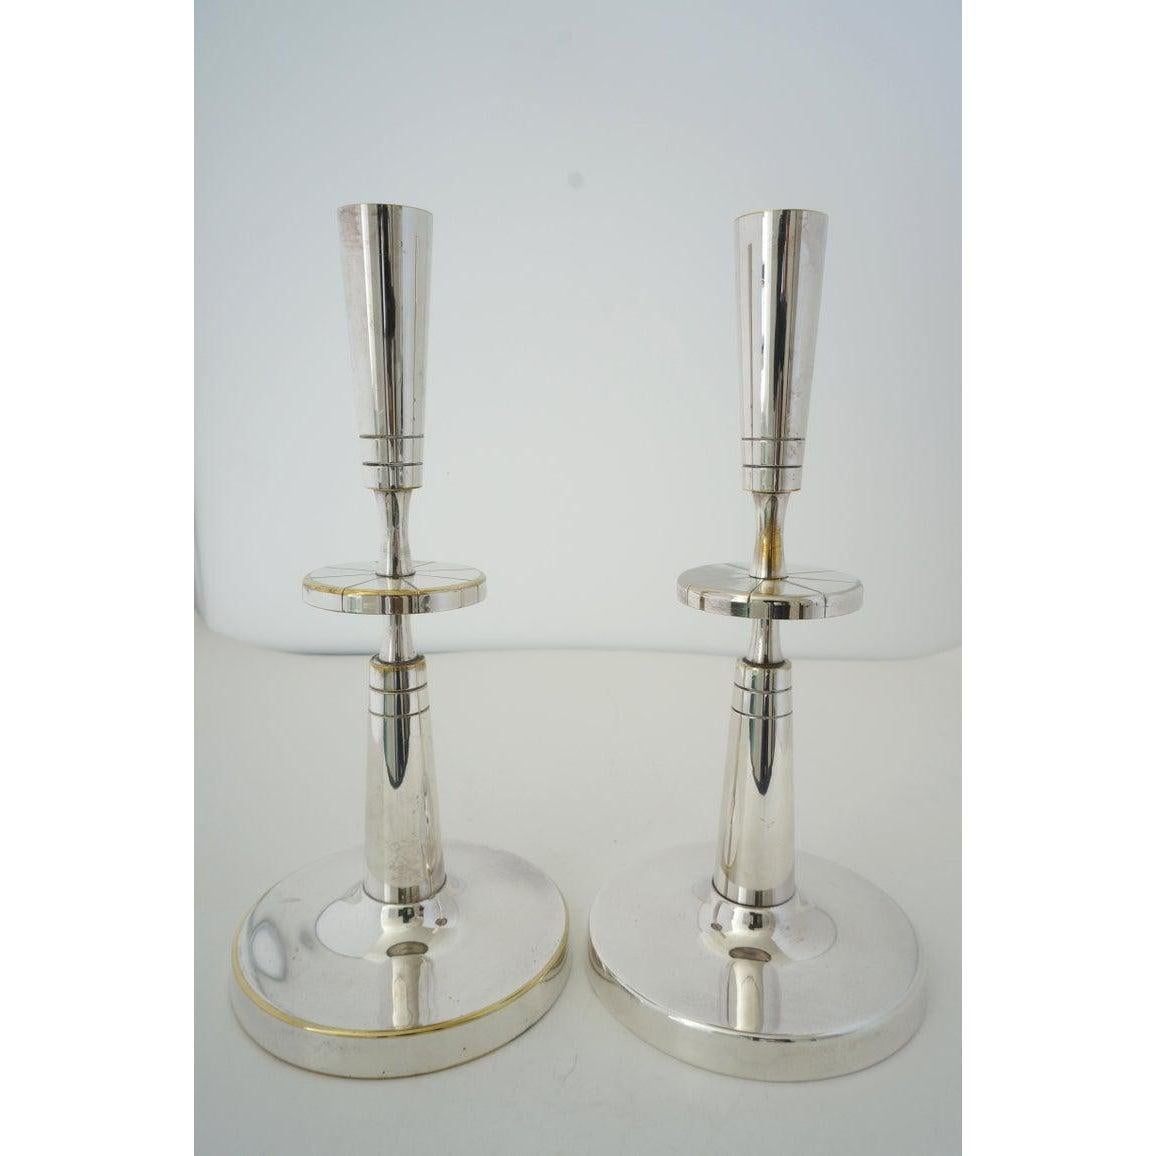 This stylish set of silverplate over brass candle sticks were designed by Tommi Parzinger for Mueck-Cary.

Note: Mueck-Cary silverplate on the verso of the base.

Note: There is some loss of silver on various areas (see images).